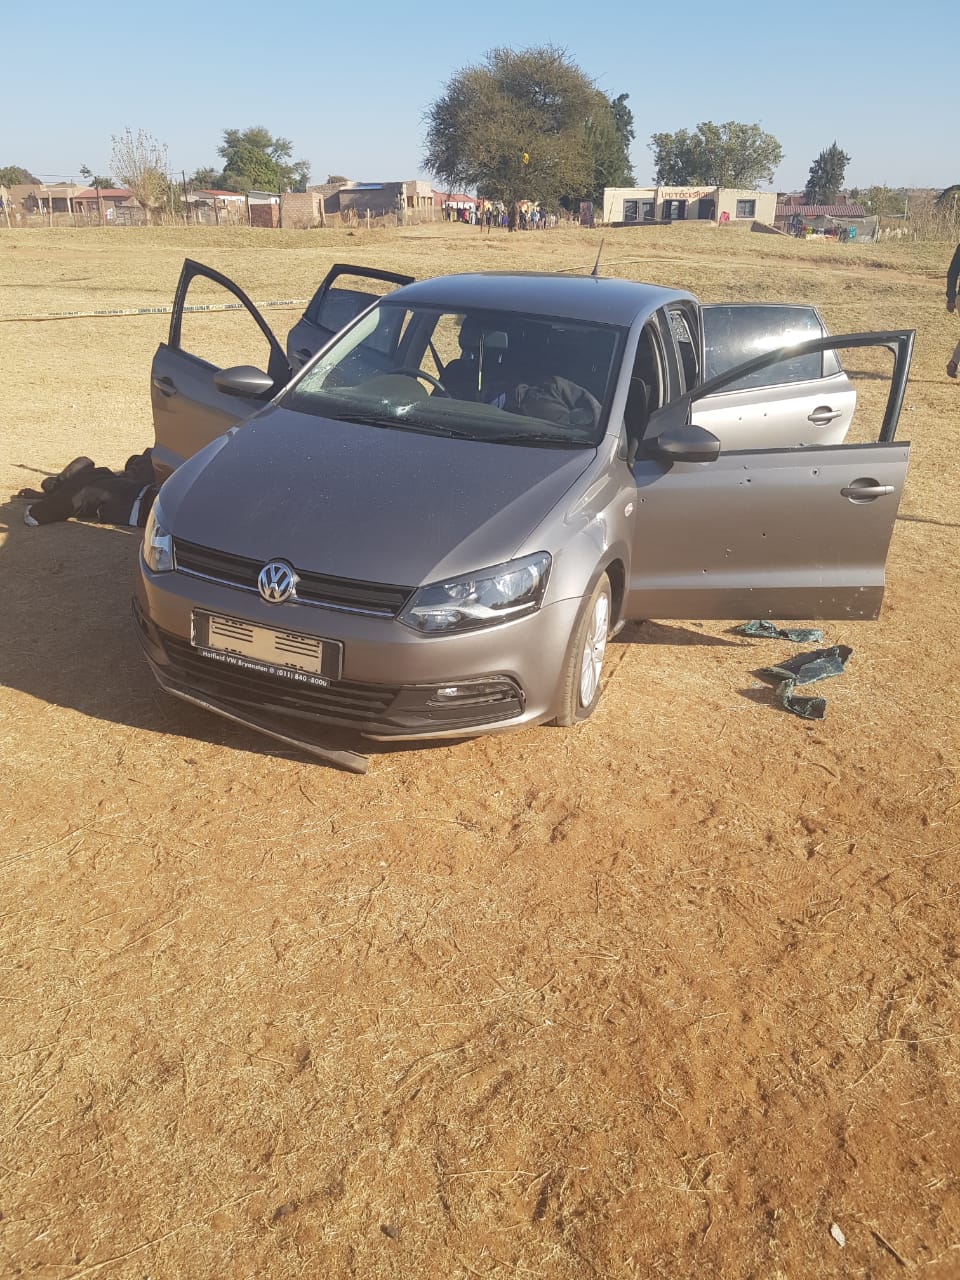 One suspect fatally wounded, two seriously injured and others apprehended as police foil business robbery - Limpopo